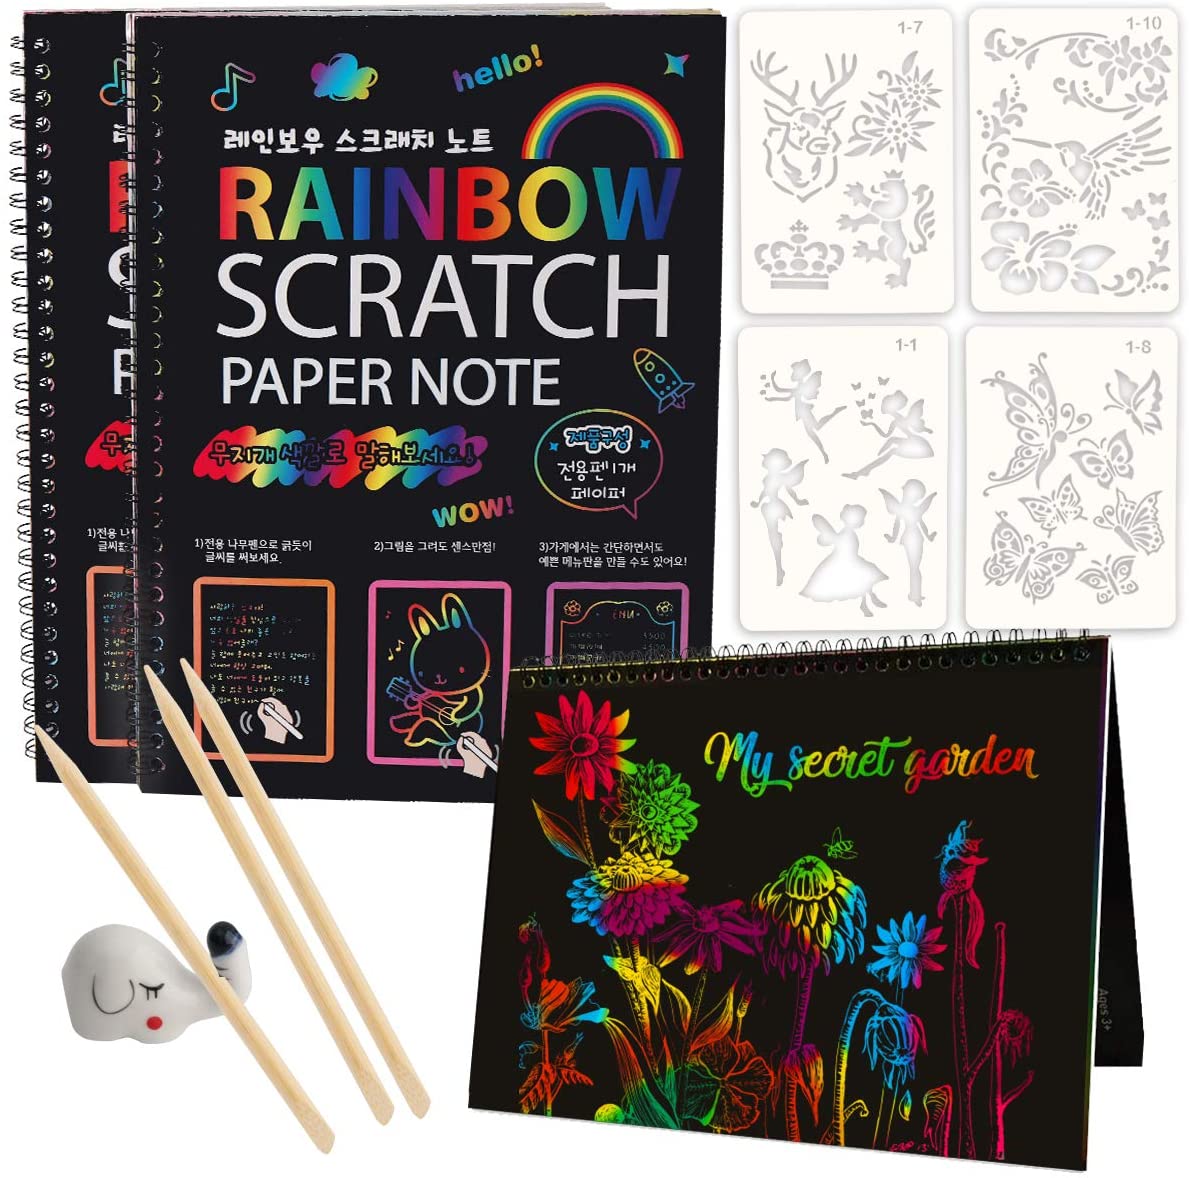 Mocoosy 3 Pack Rainbow Scratch Art Note Books - Magic Scratch off Paper  Notebook Set for Kids Art and Craft Activity Book Black Sketch Doodle Pads  with Painting Stencils for Party Favor